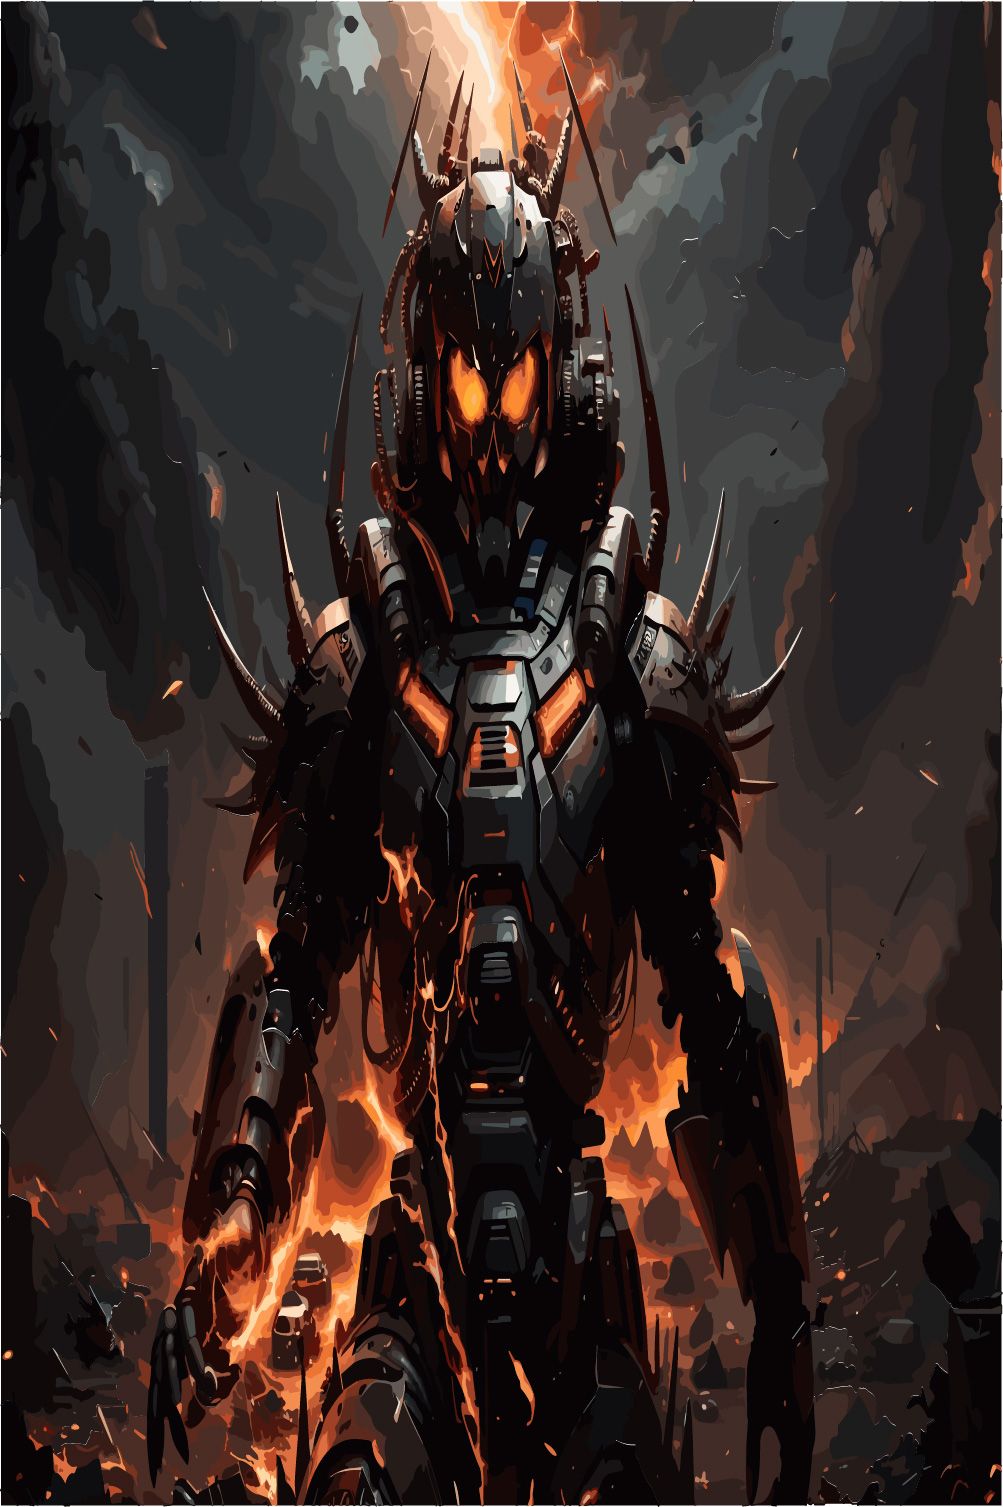 A future solider with powerful technologyanimated art pinterest preview image.